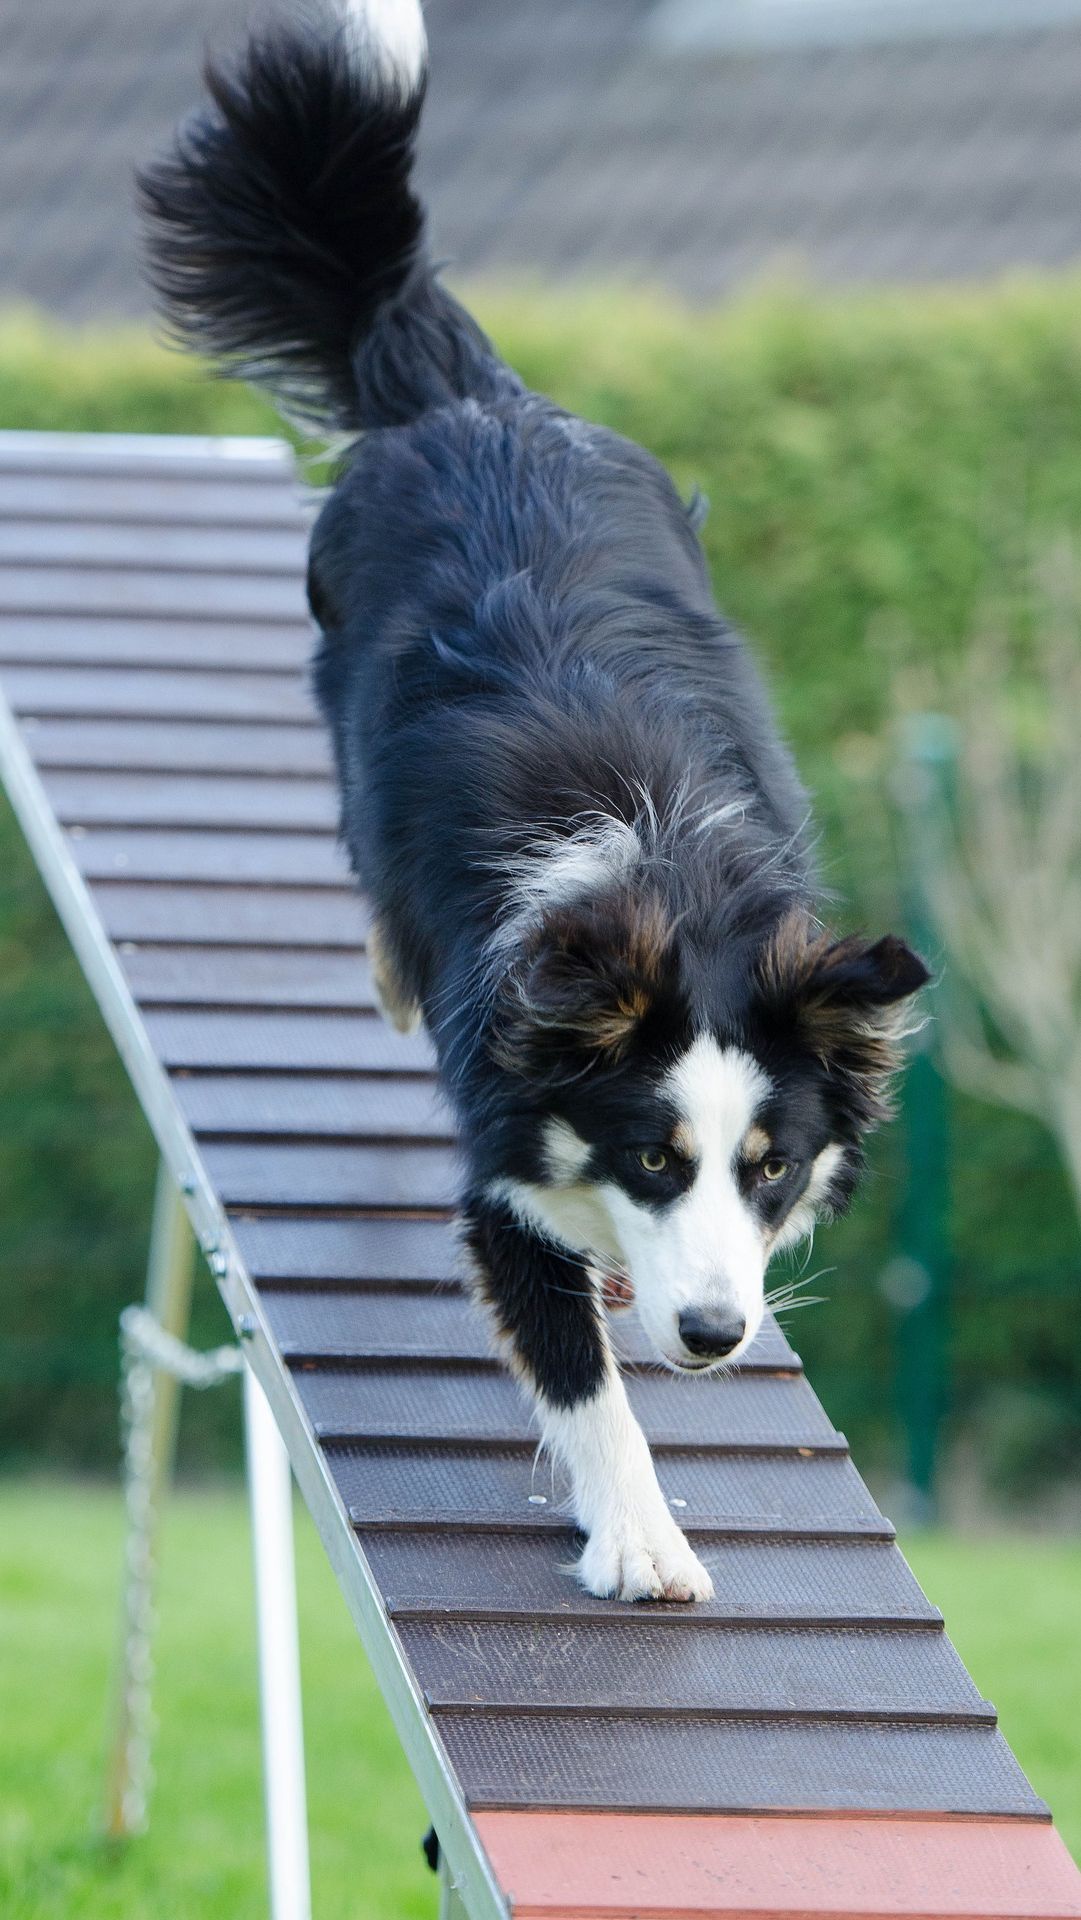 1. Dog Parkour: Urban Adventures <br><br>Dog parkour takes everyday obstacles like benches, railings, and walls. This sport turns them into an urban playground for your pup. Dogs learn to navigate, balance, and jump on and off various structures.<br><br>Photo: pixabay